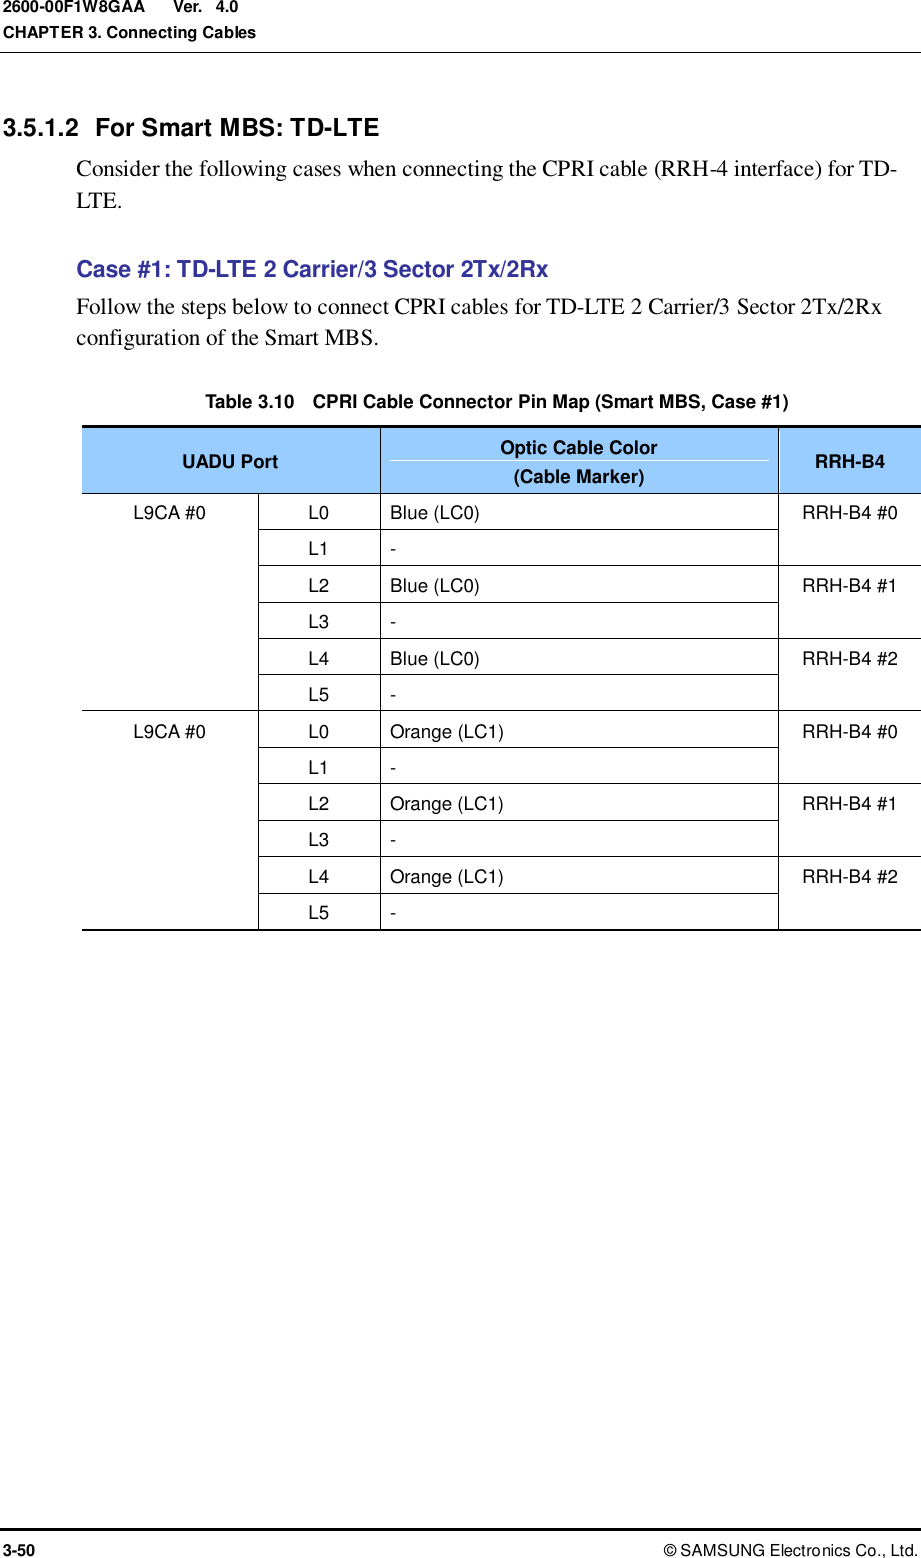  Ver.  CHAPTER 3. Connecting Cables 3-50 ©  SAMSUNG Electronics Co., Ltd. 2600-00F1W8GAA 4.0 3.5.1.2  For Smart MBS: TD-LTE Consider the following cases when connecting the CPRI cable (RRH-4 interface) for TD-LTE.      Case #1: TD-LTE 2 Carrier/3 Sector 2Tx/2Rx Follow the steps below to connect CPRI cables for TD-LTE 2 Carrier/3 Sector 2Tx/2Rx configuration of the Smart MBS.  Table 3.10    CPRI Cable Connector Pin Map (Smart MBS, Case #1) UADU Port Optic Cable Color (Cable Marker) RRH-B4 L9CA #0 L0 Blue (LC0) RRH-B4 #0 L1 - L2 Blue (LC0) RRH-B4 #1 L3 - L4 Blue (LC0) RRH-B4 #2 L5 - L9CA #0 L0 Orange (LC1) RRH-B4 #0 L1 - L2 Orange (LC1) RRH-B4 #1 L3 - L4 Orange (LC1) RRH-B4 #2 L5 -  